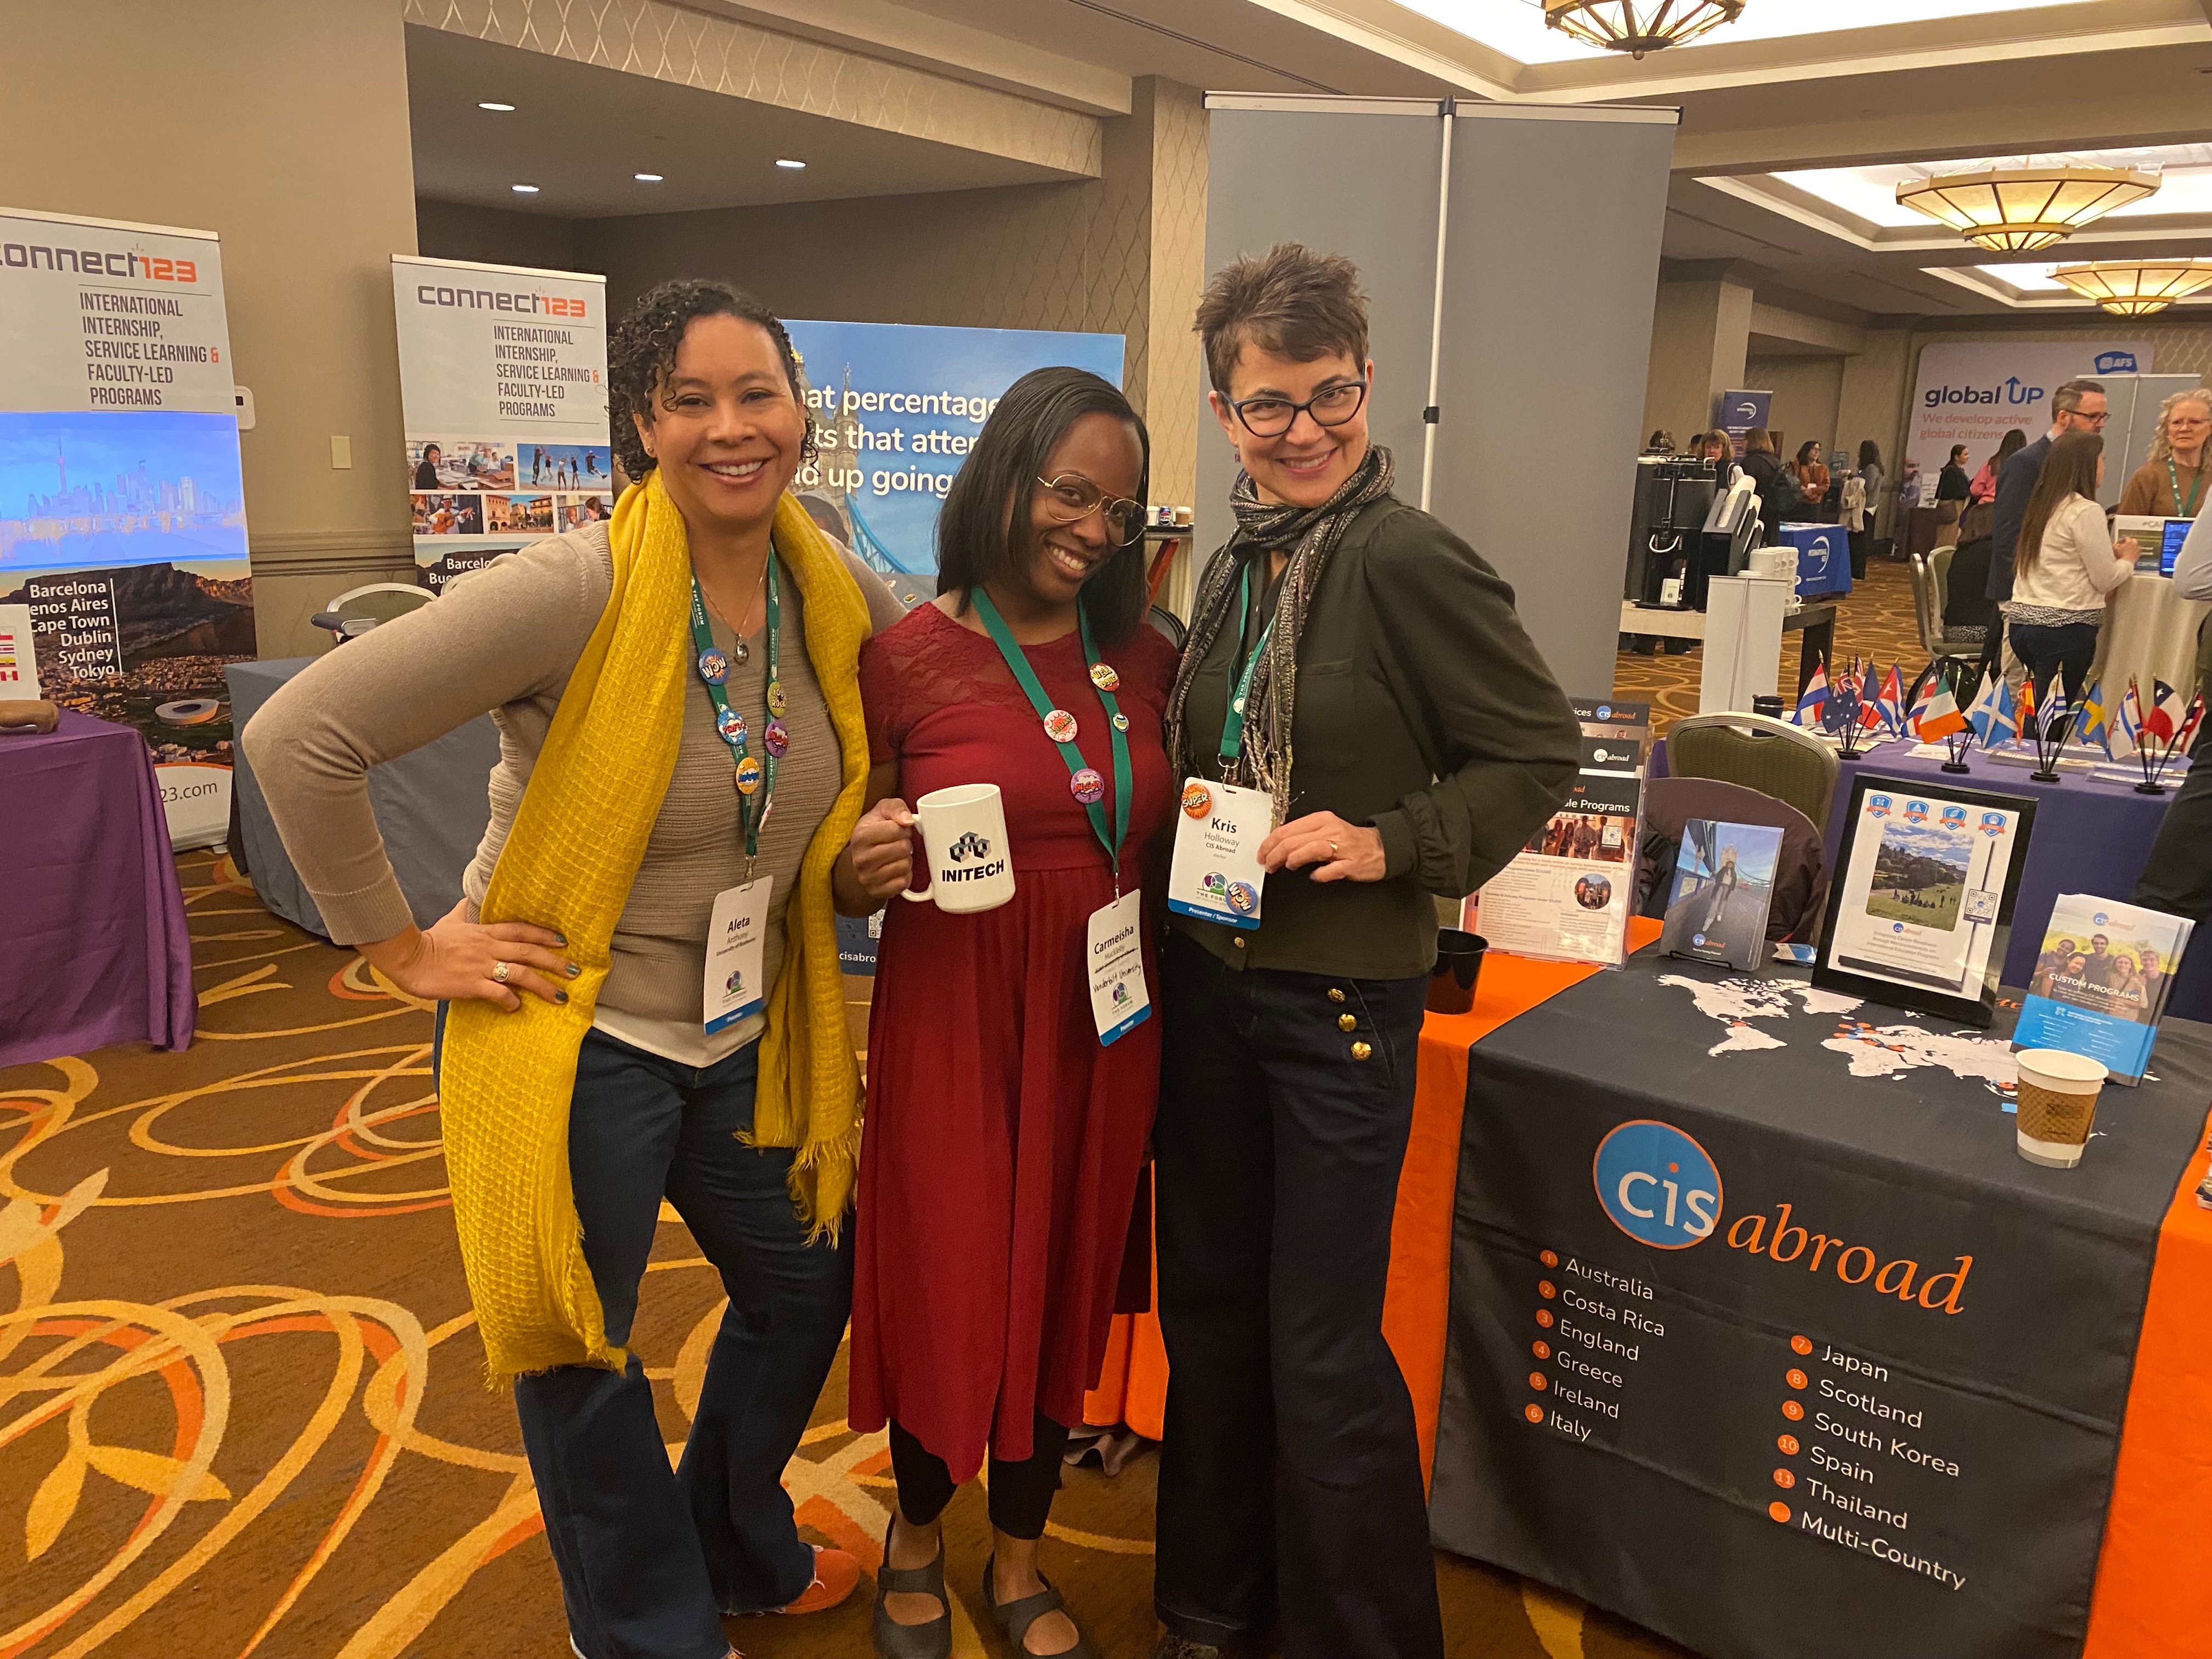 Aleta Anthony (University of Rochester), Carmeisha Huckleby (Vanderbilt University) and I used themes from “Office Space” to support our presentation on Inclusive Hiring at the recent Forum Conference. This is why I love the field so much. We have fun AND do so important work!